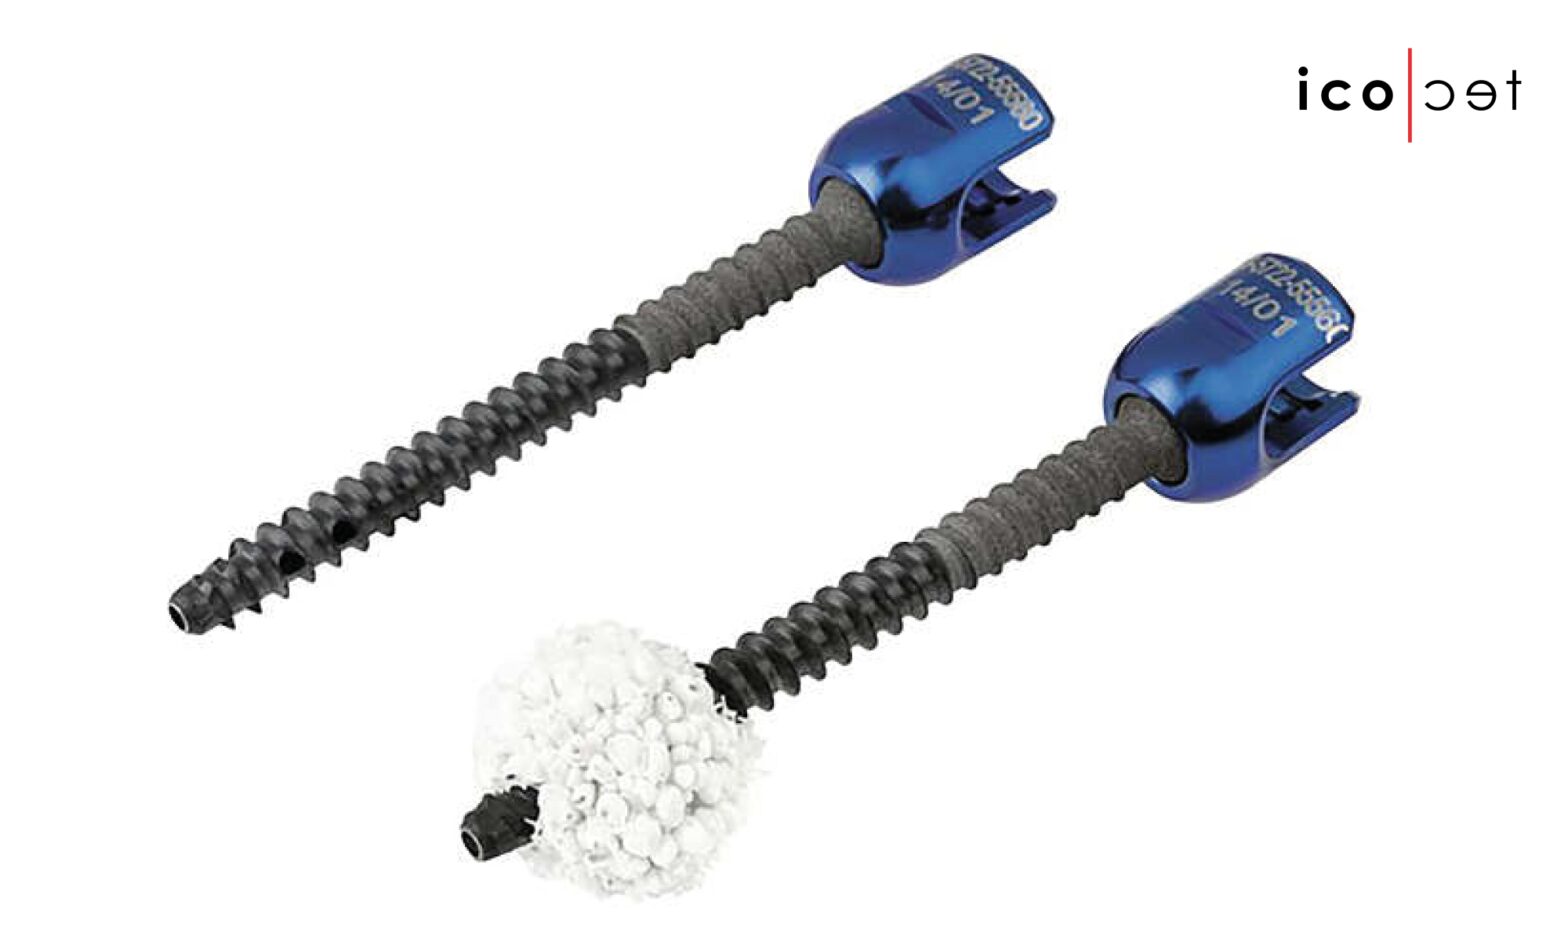 VADER® and LightMore® Pedicle Screw Systems